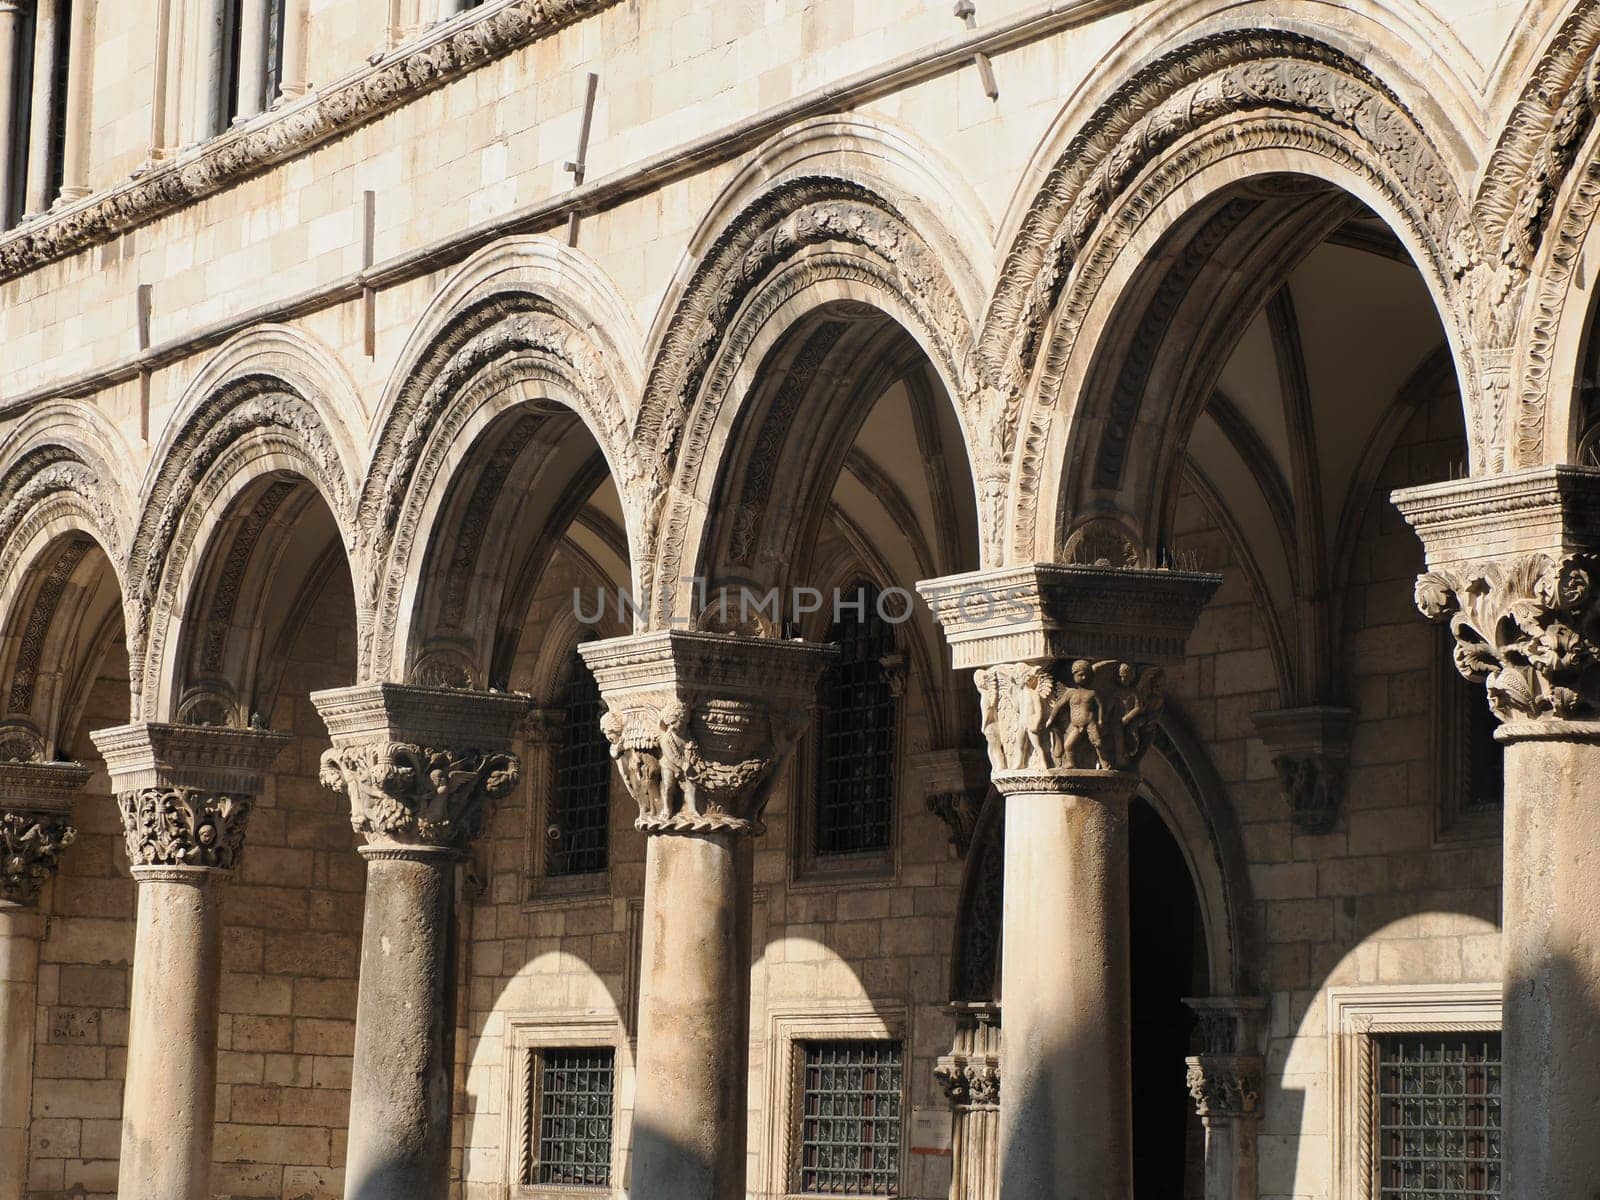 Dubrovnik Croatia medieval Rector's Palace Croatian Knezev dvor Italian Palazzo dei Rettori used to serve as the seat of the Rector of the Republic of Ragusa between the 14th century and 1808